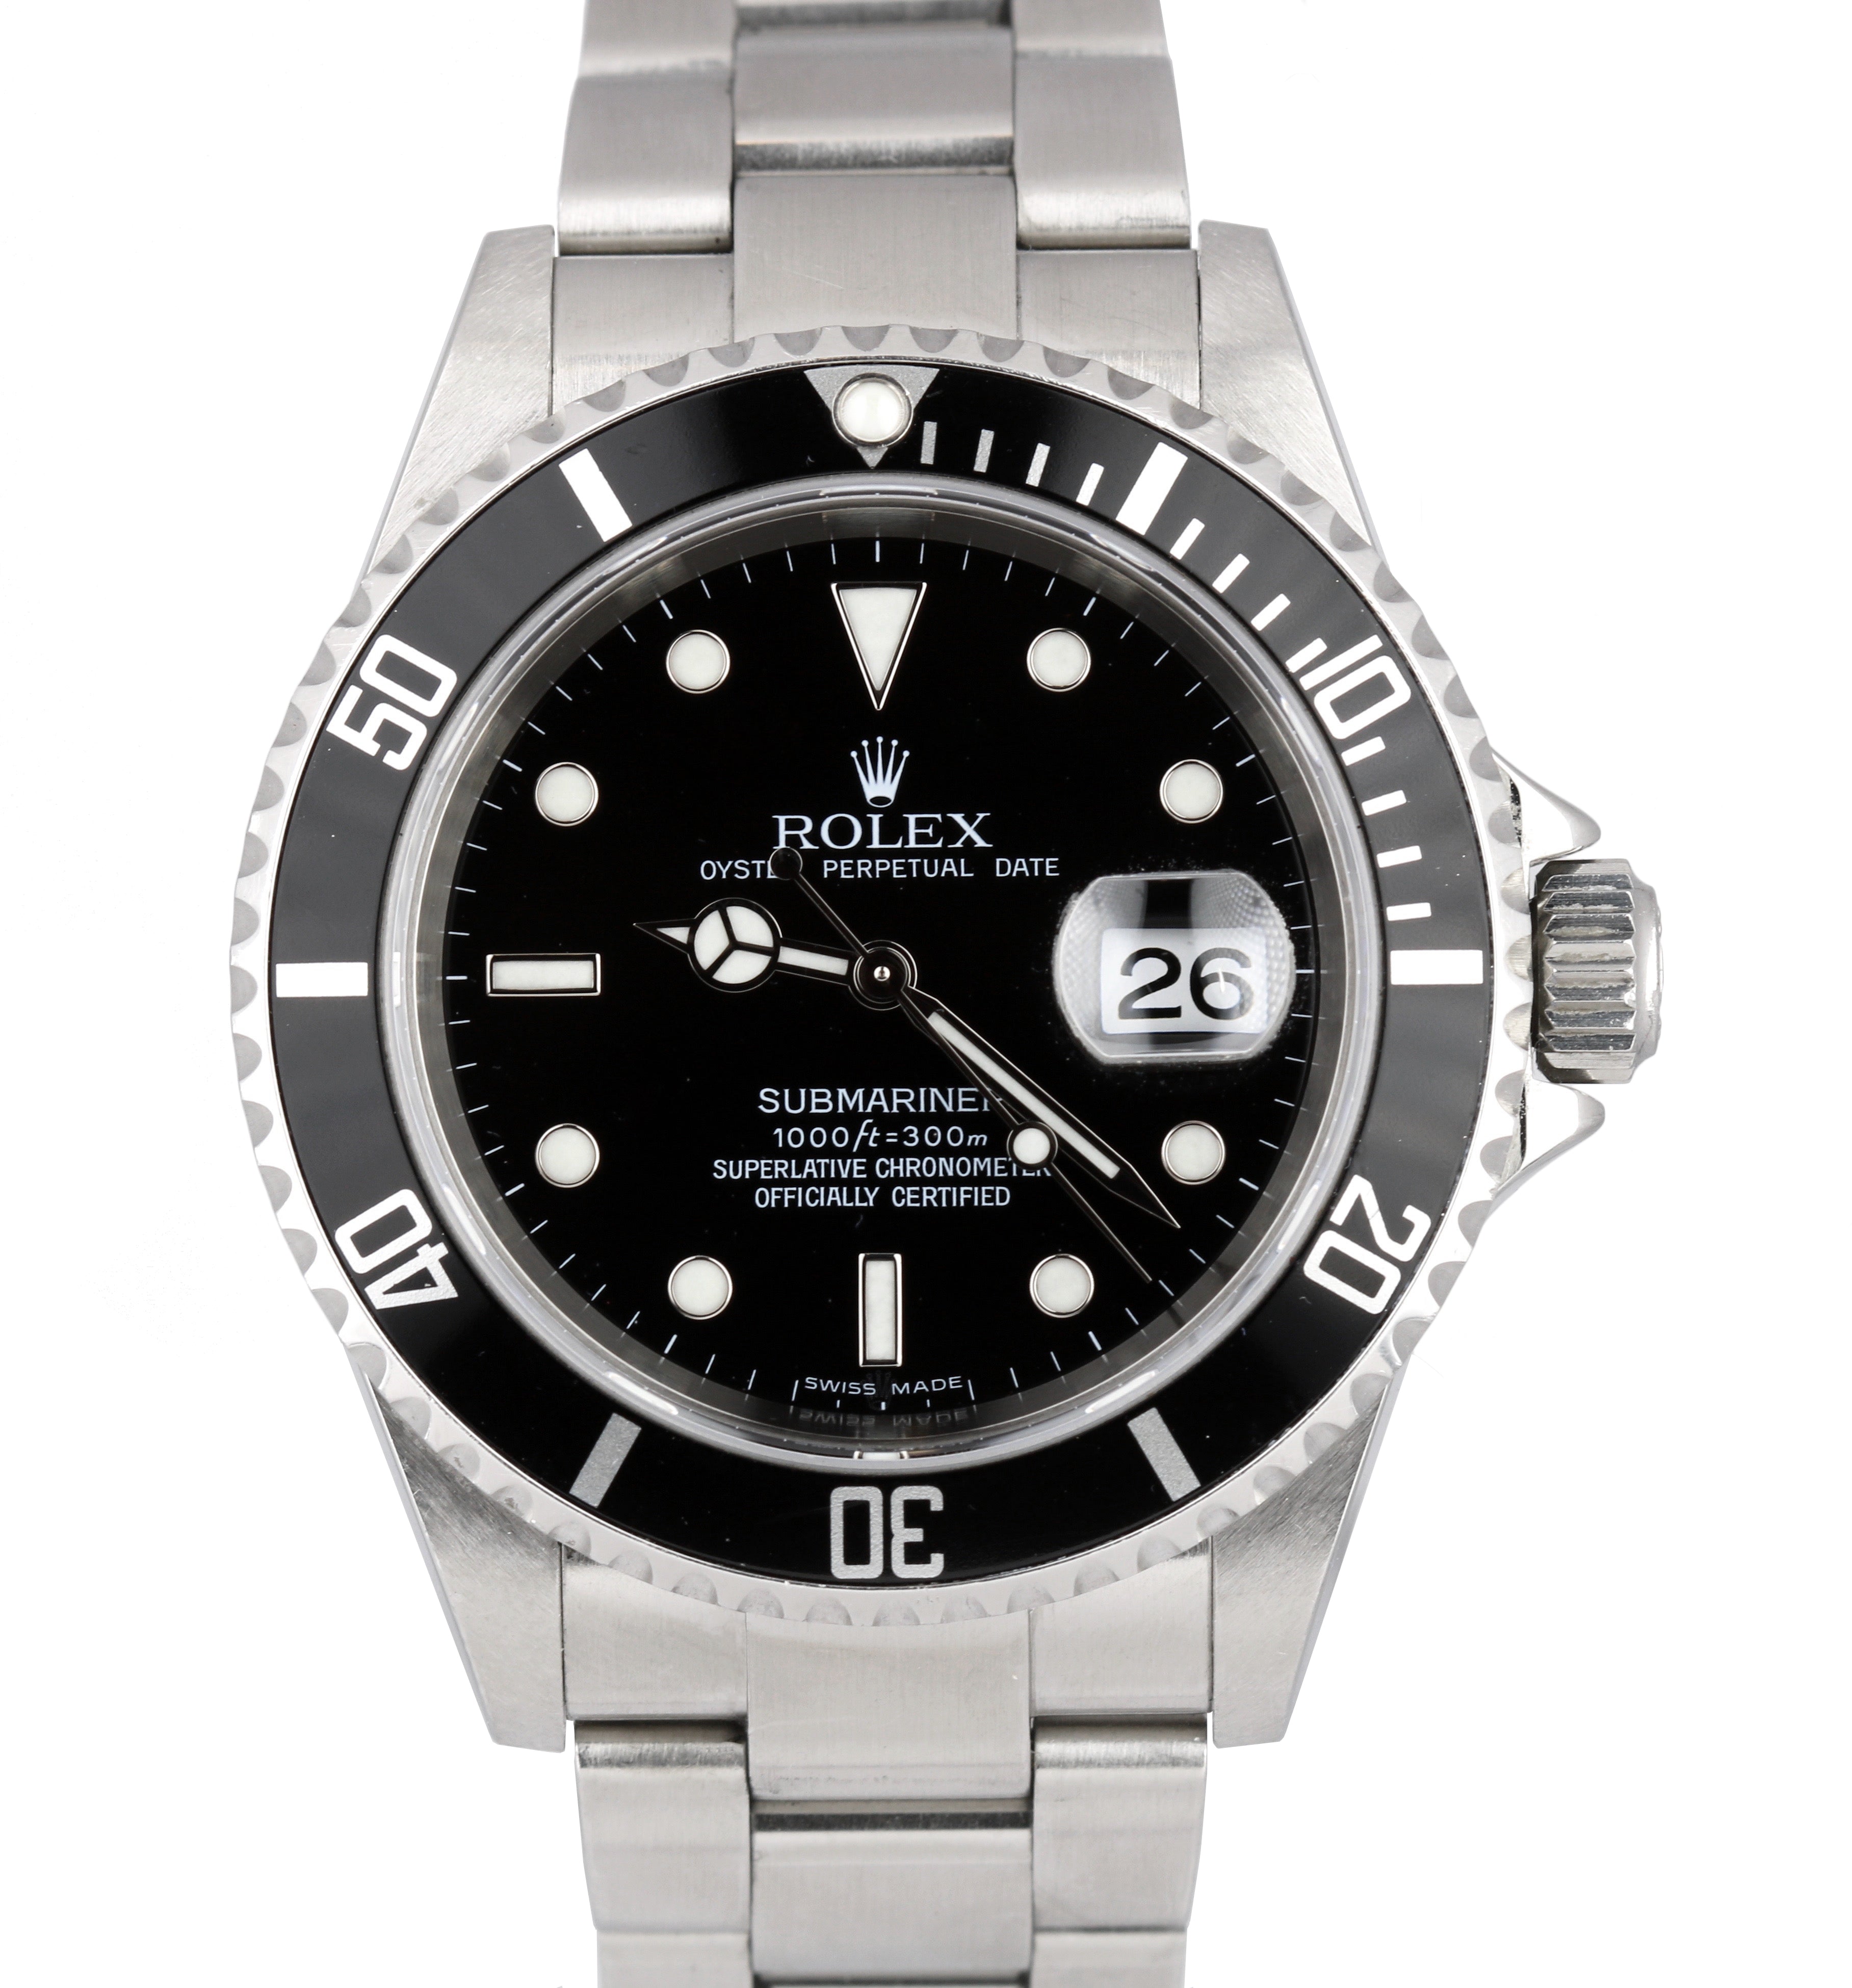 2007 UNPOLISHED Rolex Submariner Date 16610 Z NO HOLES SEL 40mm Black Watch